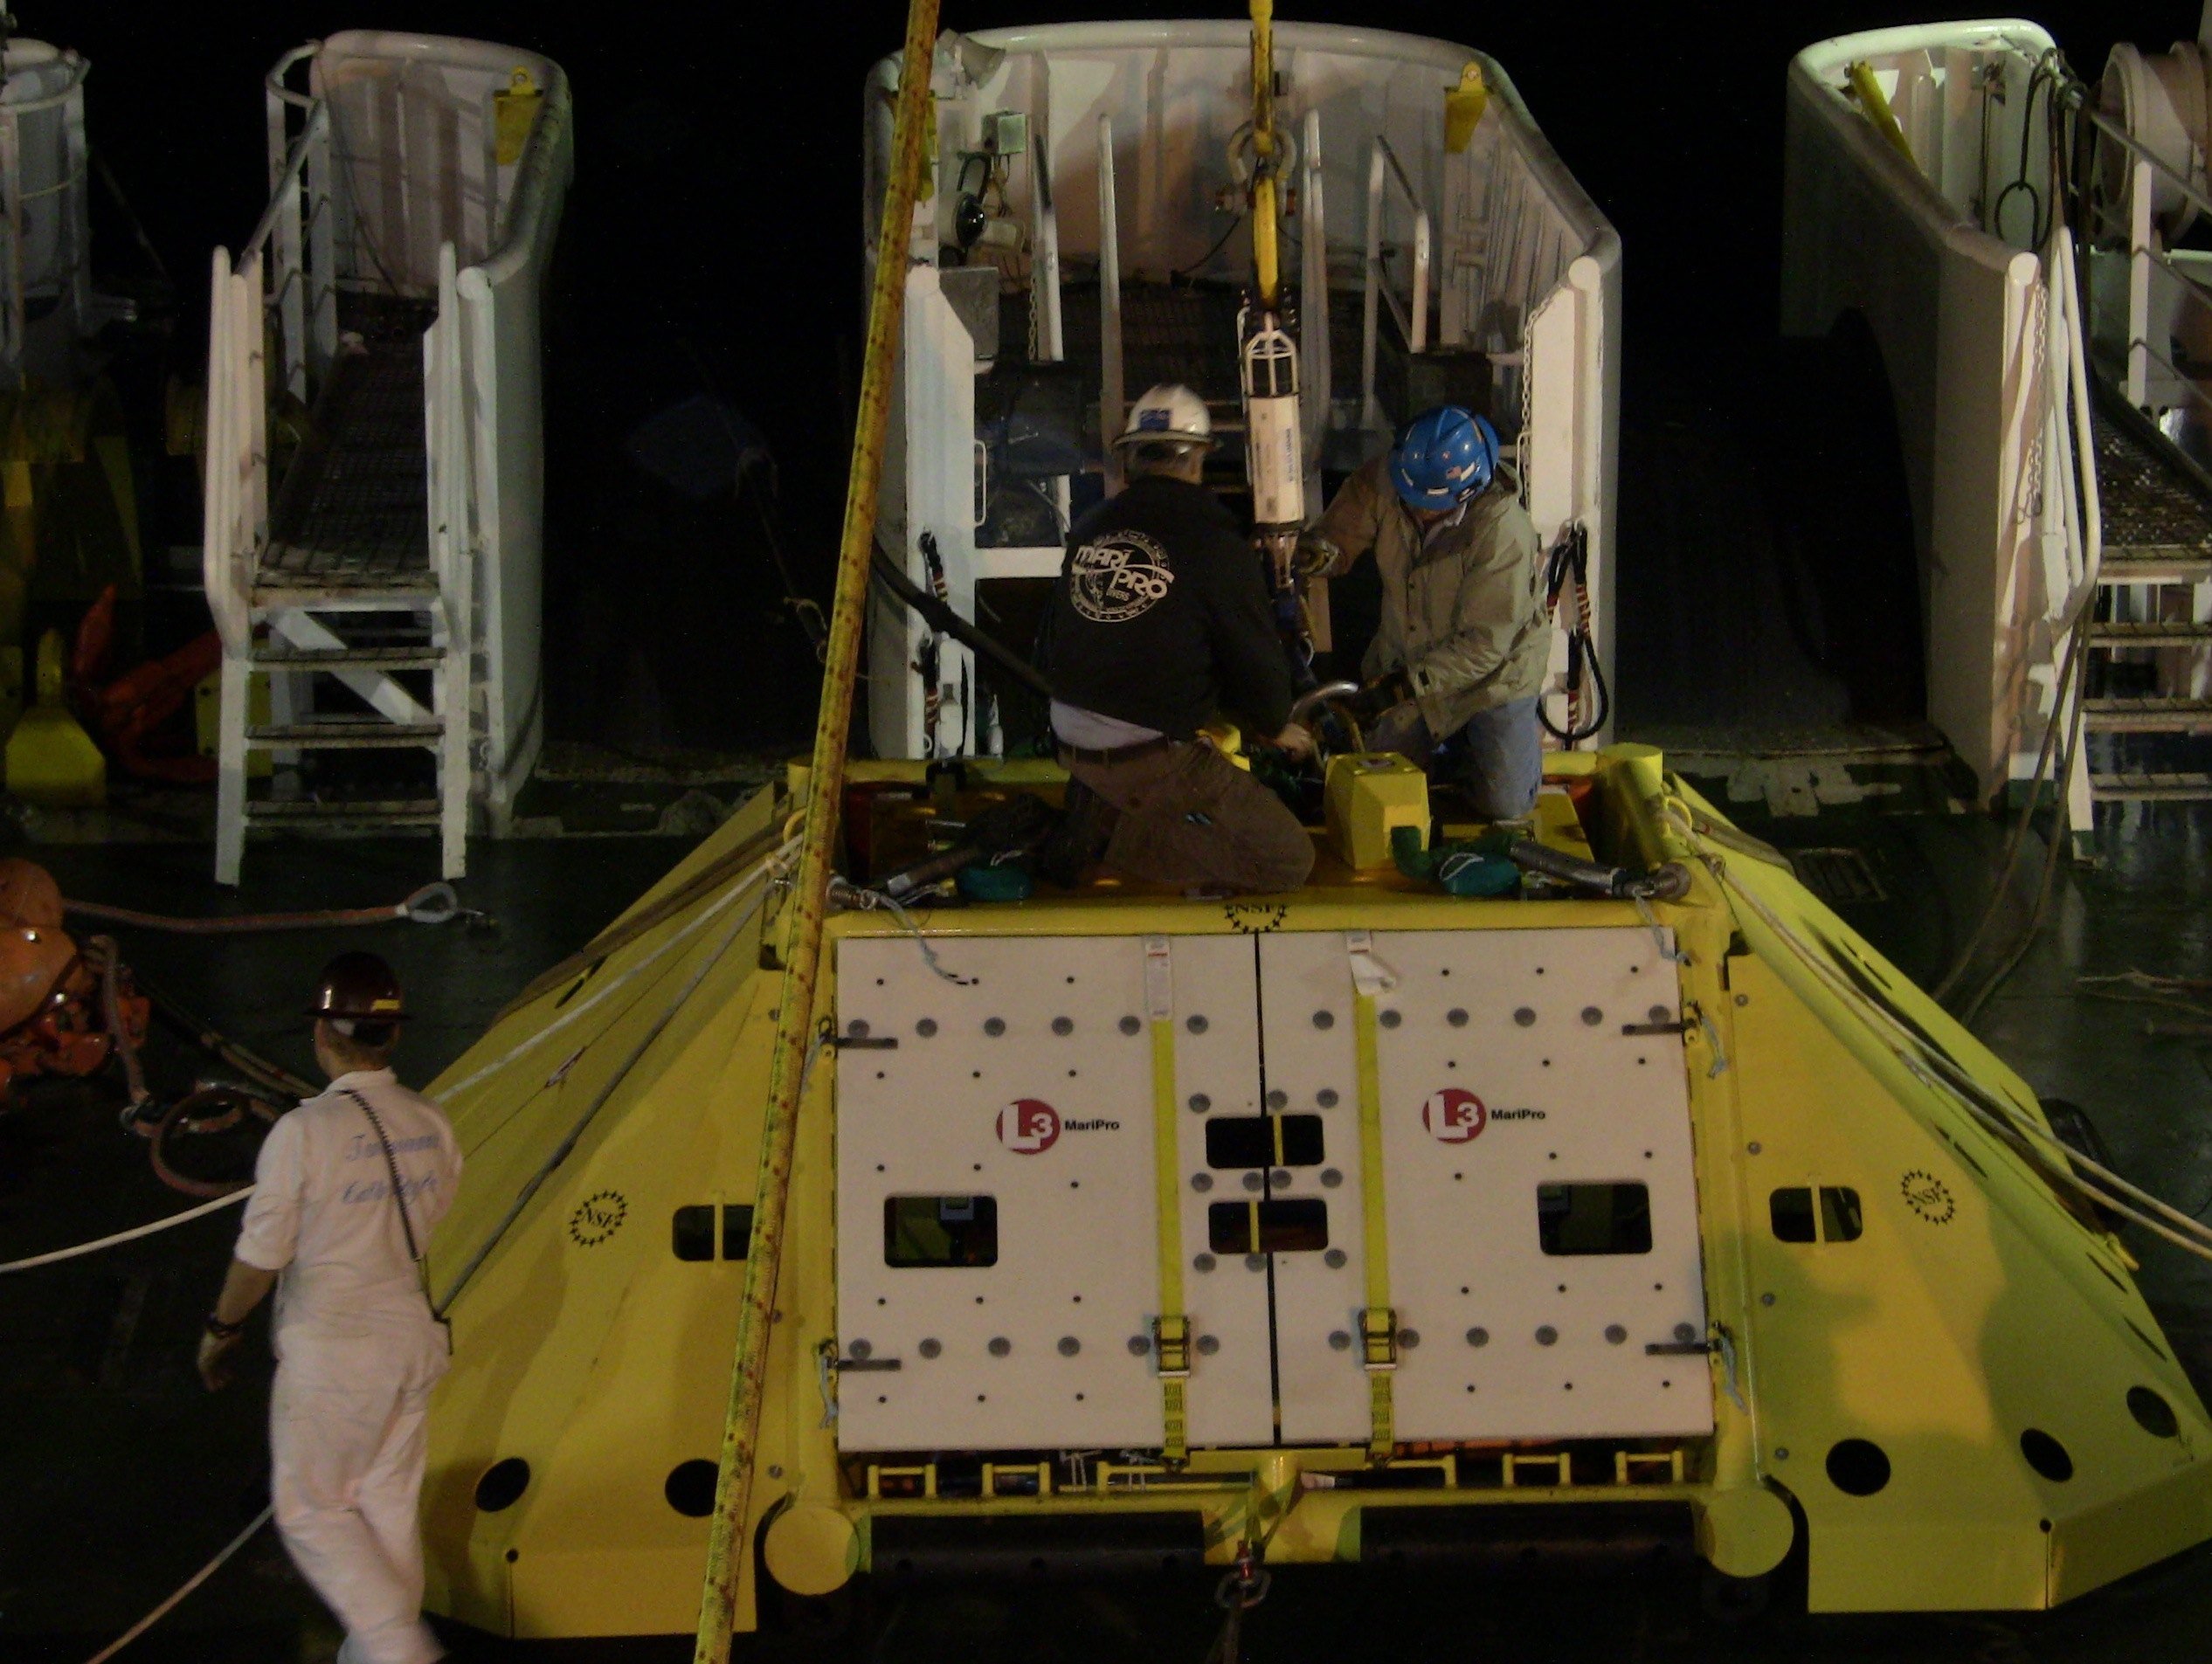 Node installation operations went on around the clock. Shown here is Primary Node 1B (PN1B) being readied for a nighttime deployment. Operations for deployment of this node began late in the evening of July 19. Just before midnight it was confirmed that the node had landed on the seabed at about 1,250m water depth and only 20m away from its target location. Photo by Cecile Durand 